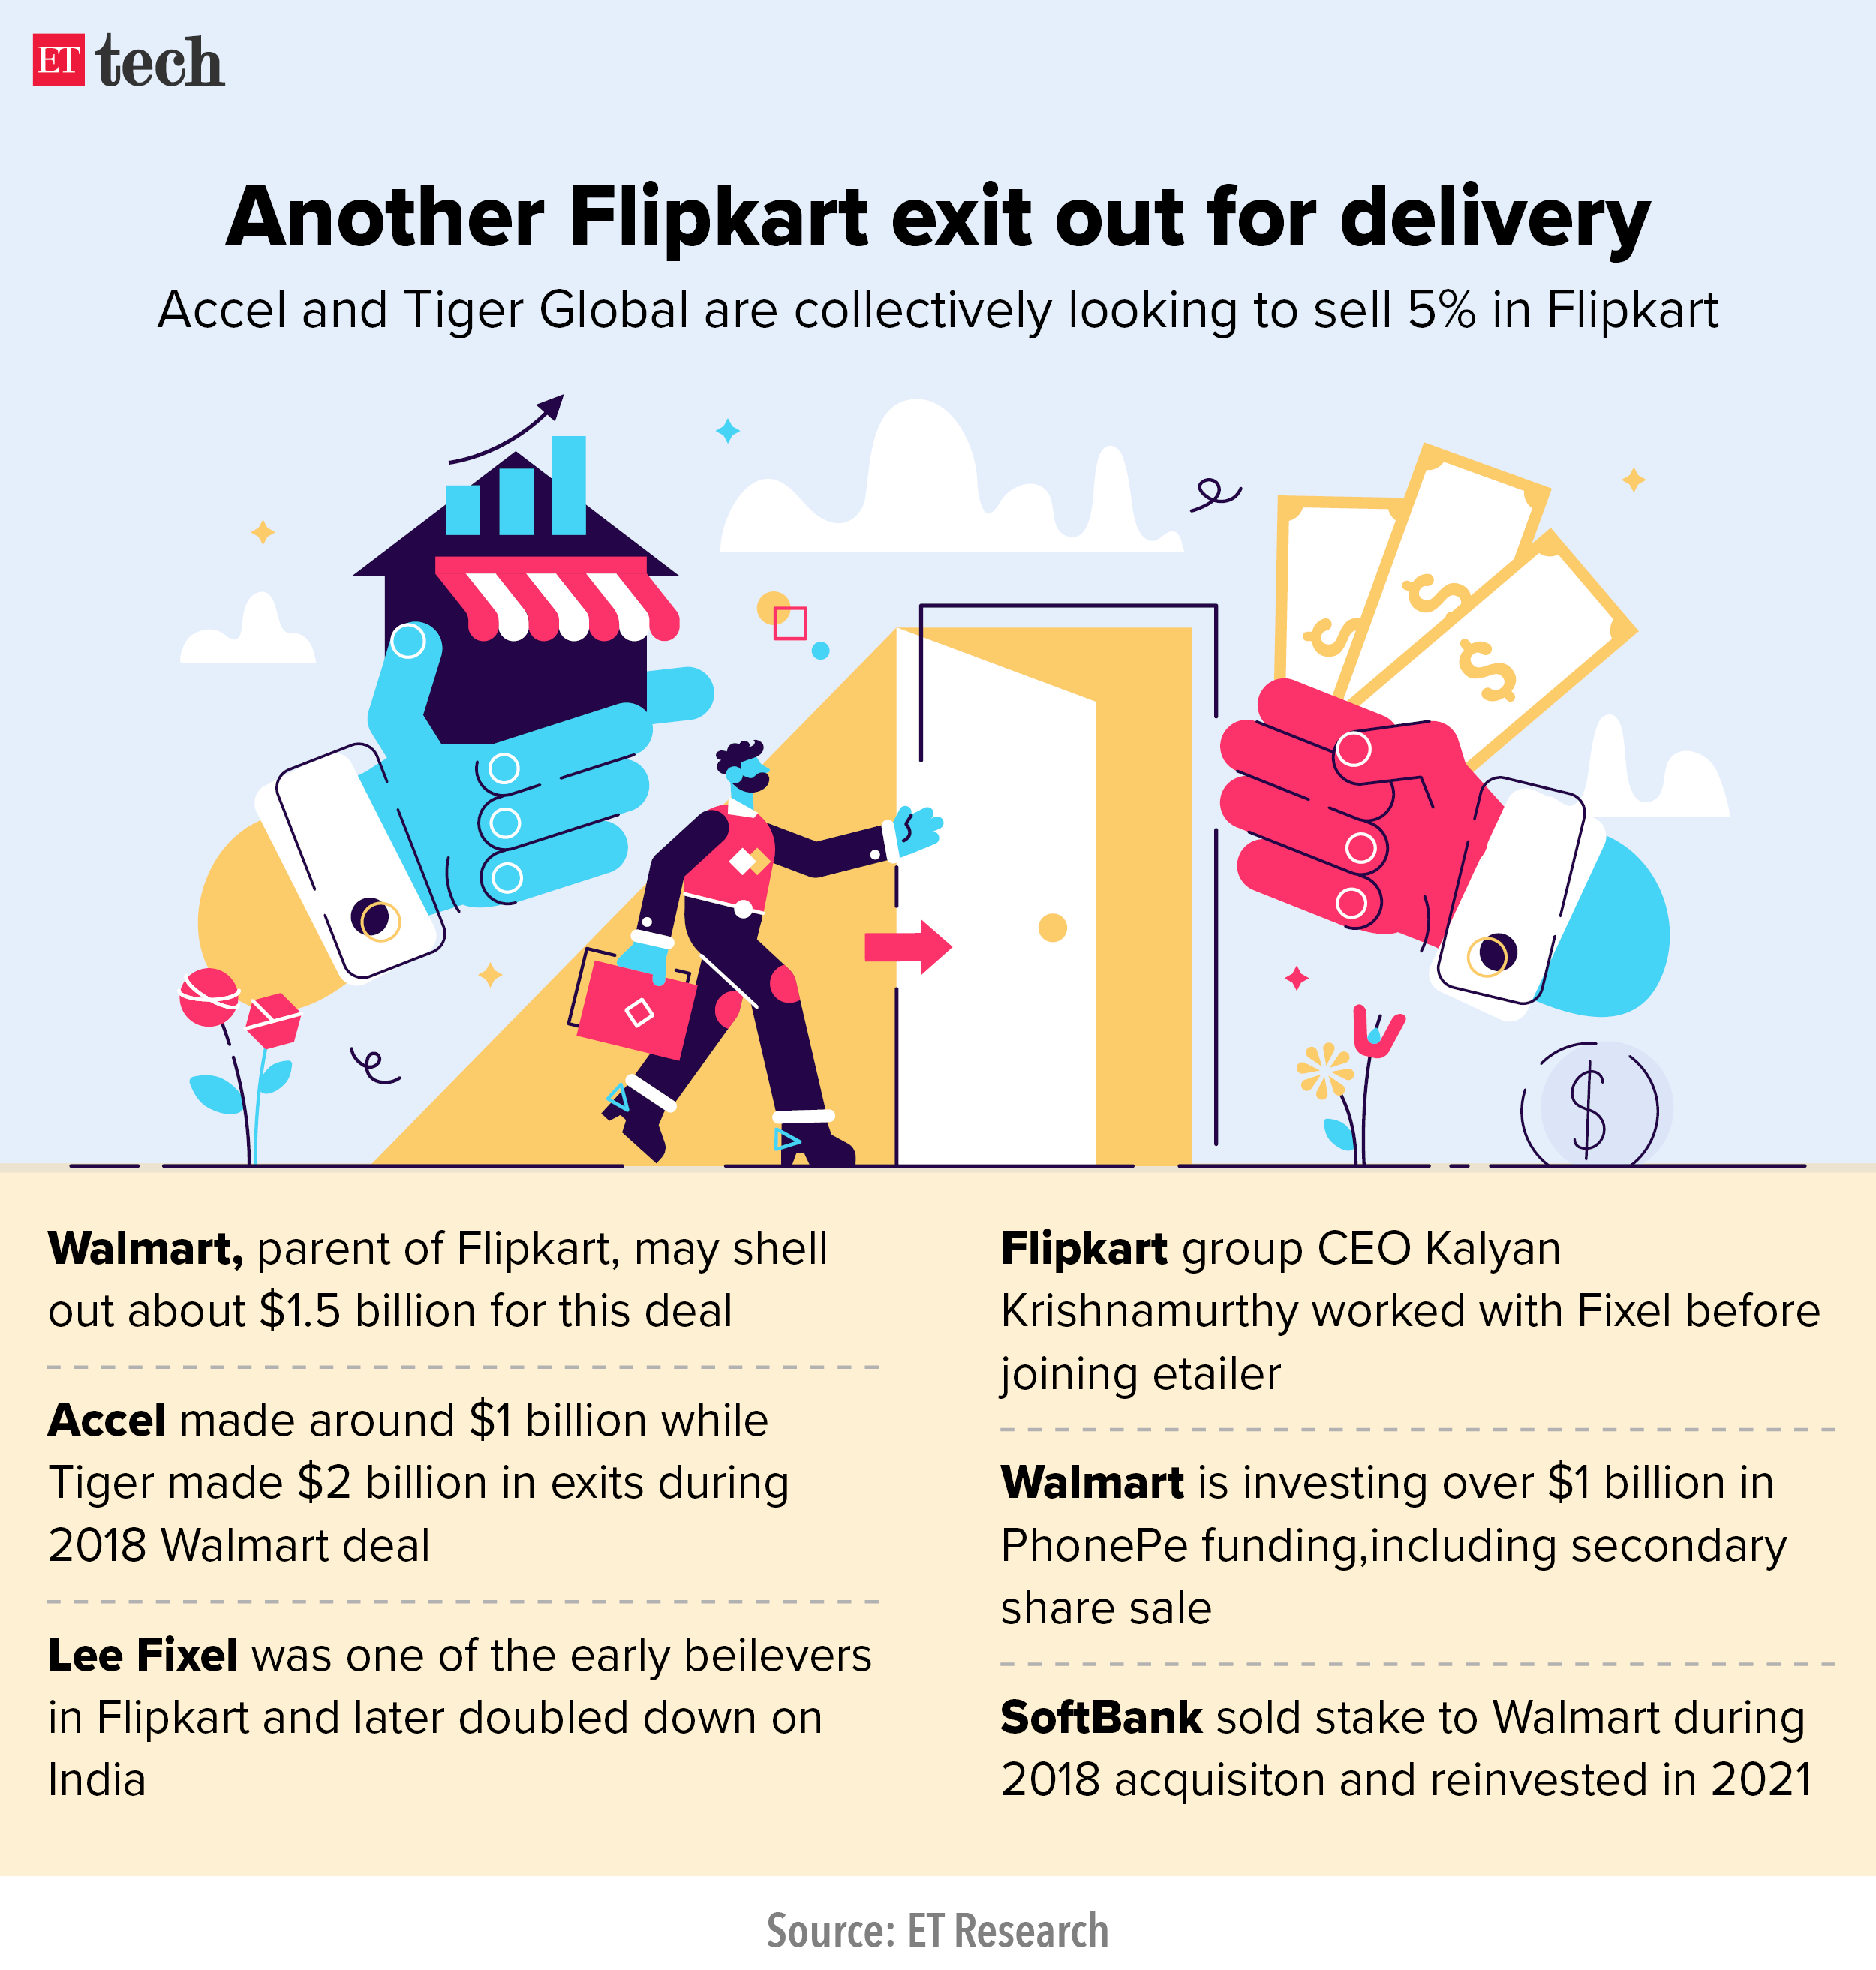 Another Flipkart release for delivery